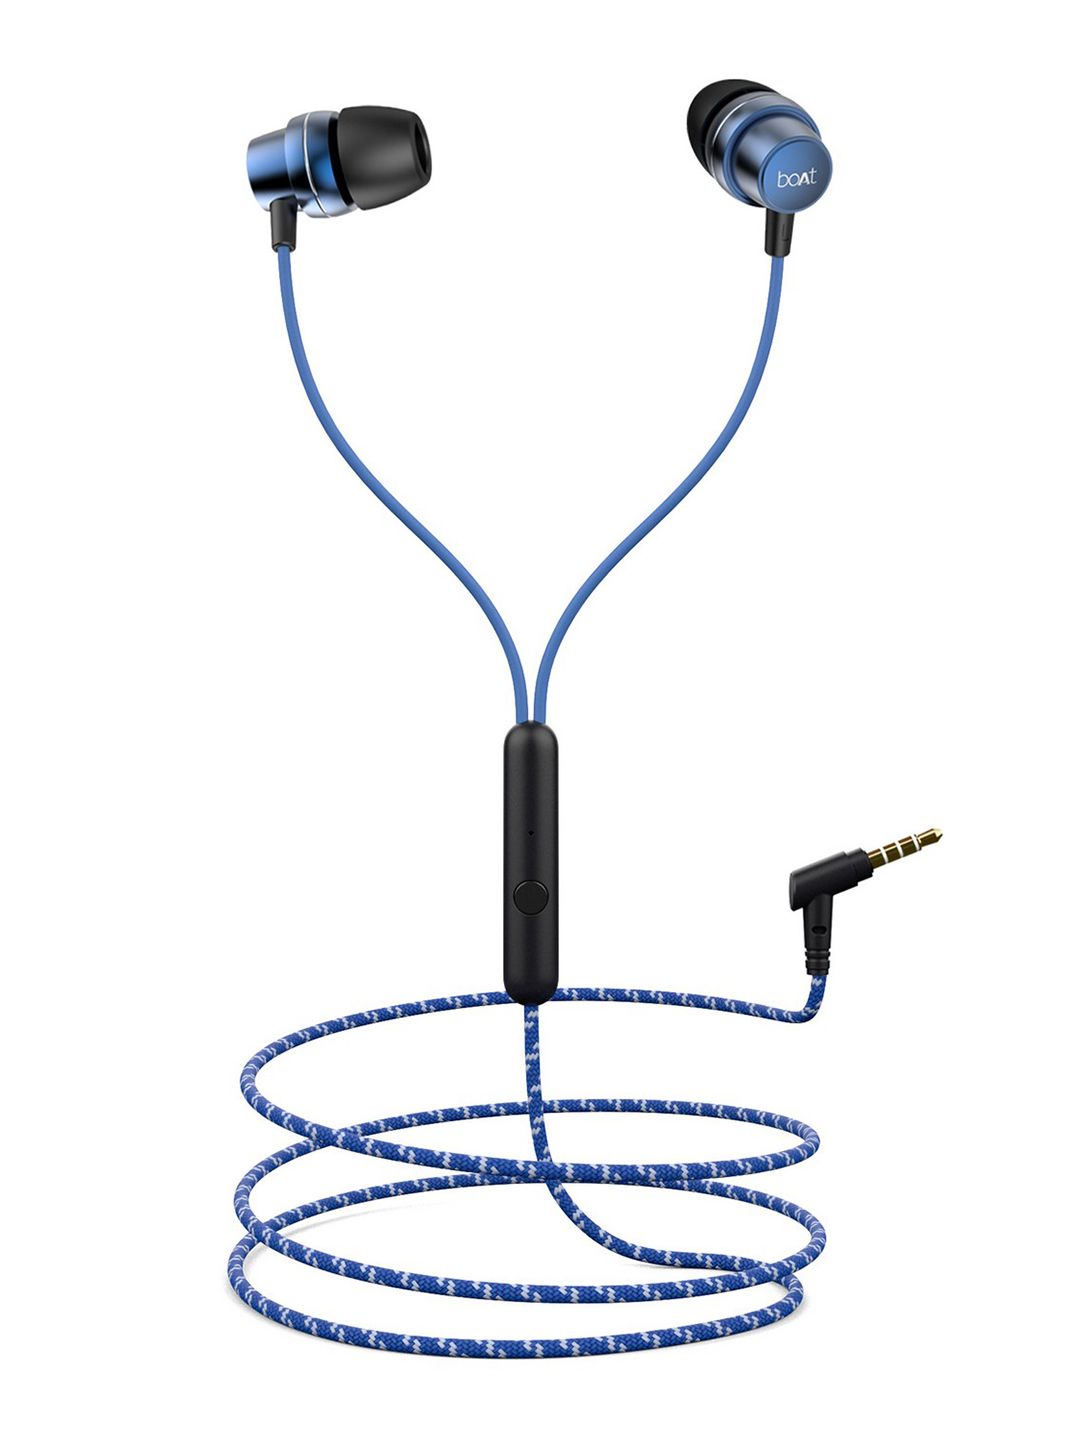 boAt BassHeads 182 Blue Braided Wired Earphones with Enhanced Bass & Metallic Finish Price in India